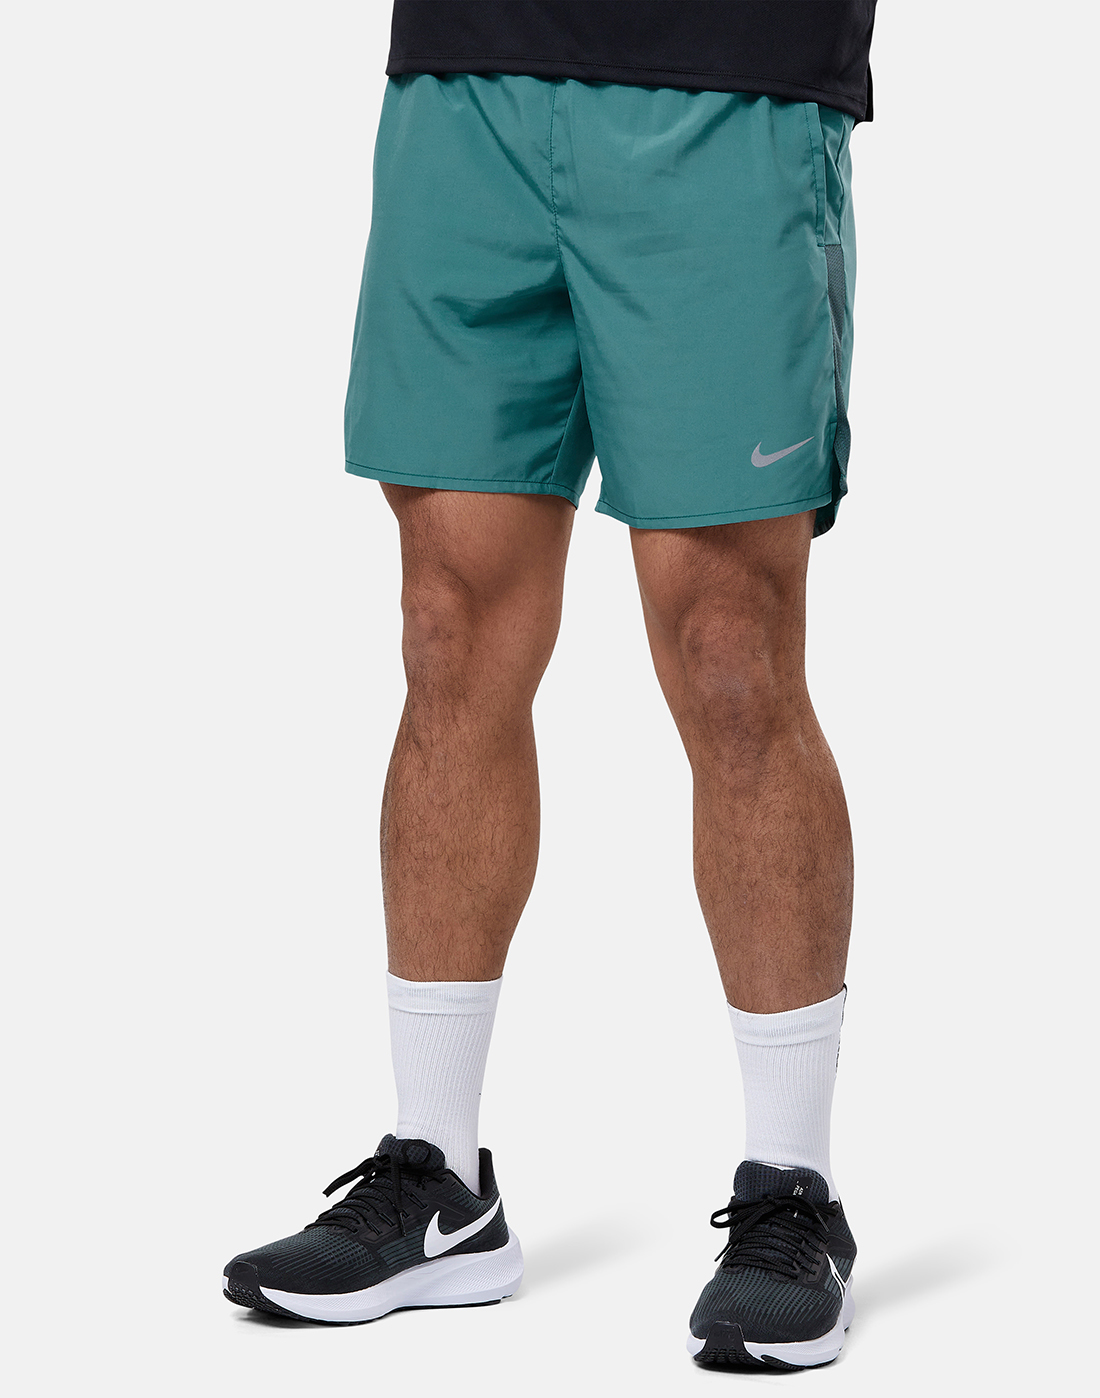 Nike Mens Challenger 7 Inch Shorts - Green | Life Style Sports UK